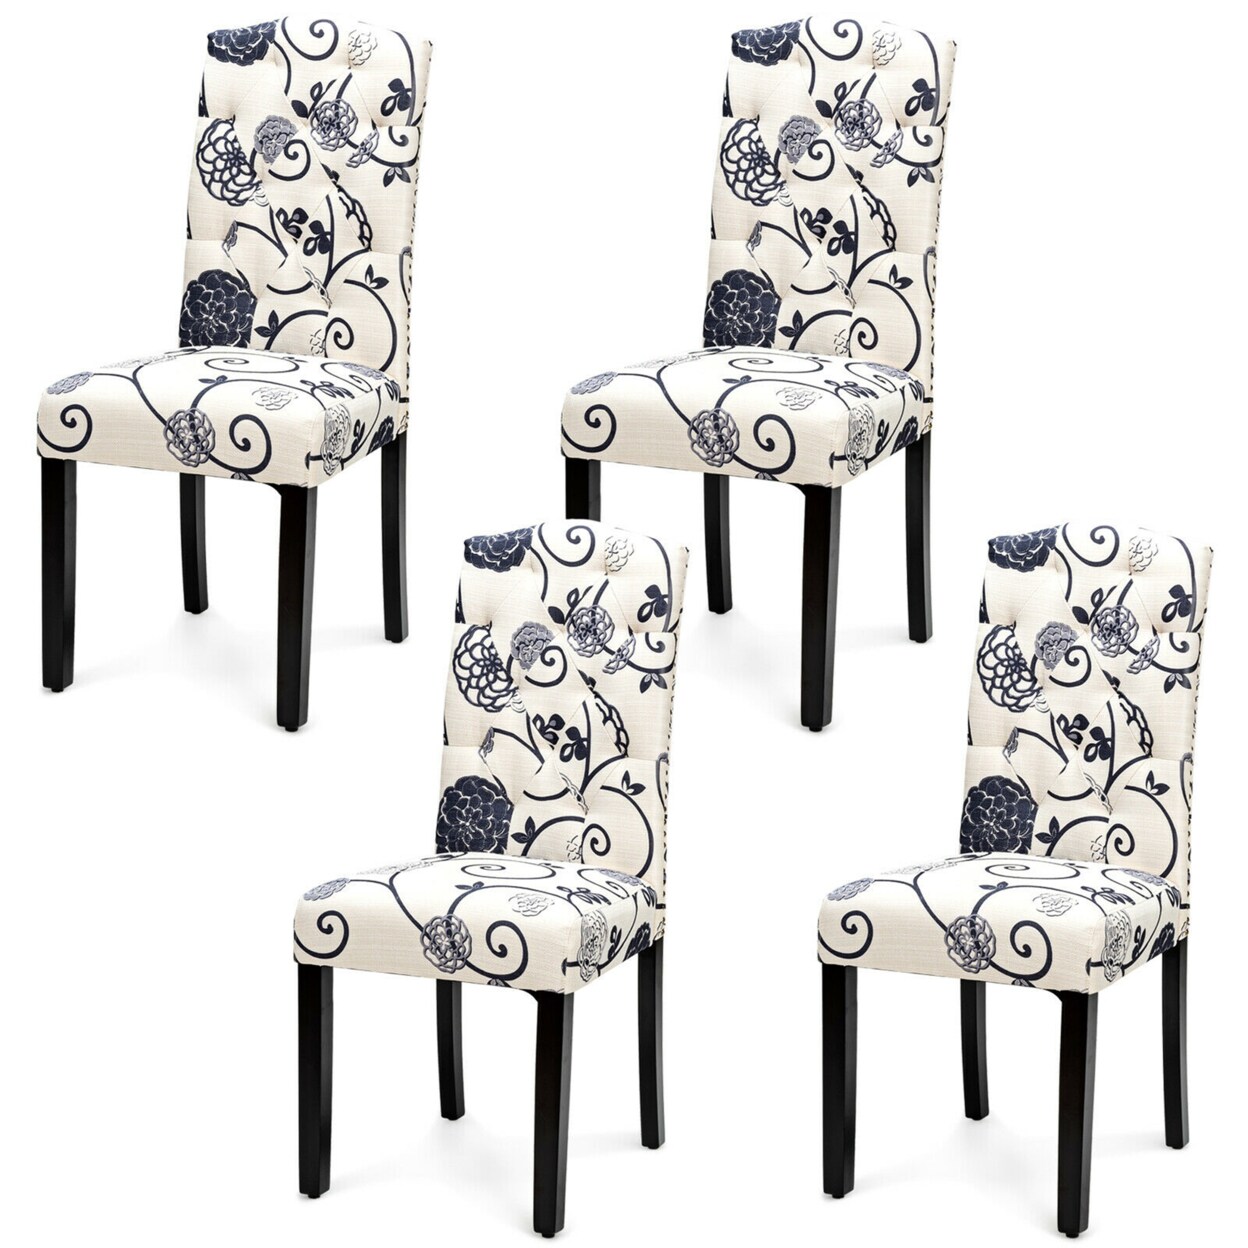 Gymax Set of 4 Tufted Dining Chair Upholstered Nailhead Trim Rubber Wooden Leg